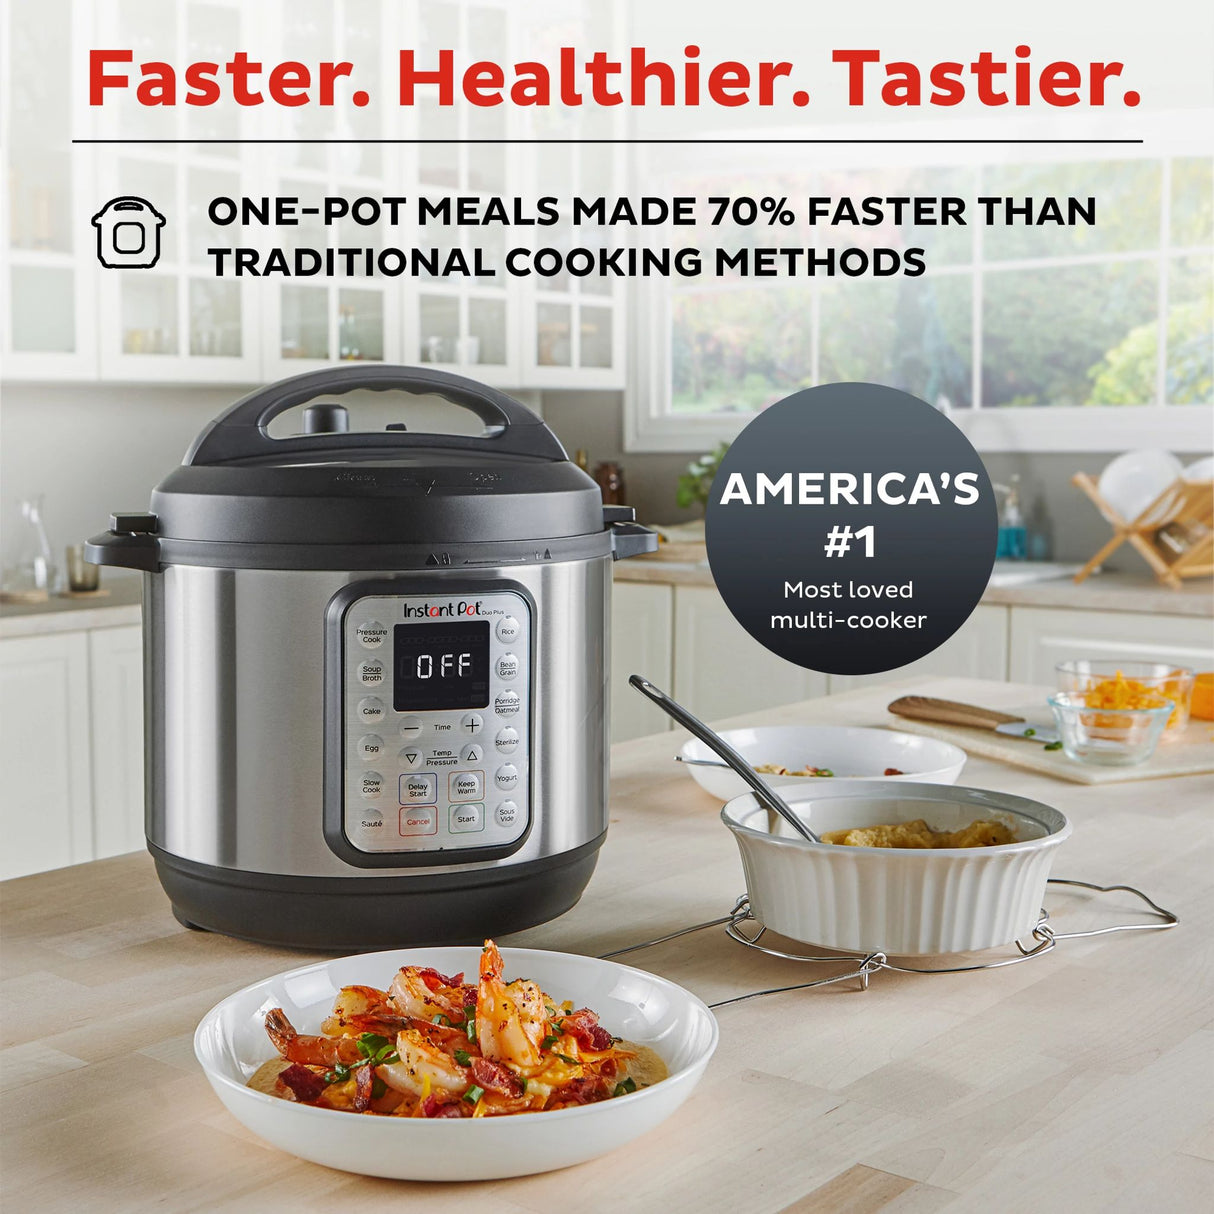  Instant Pot Duo Plus 6-qt Multi-Use Pressure Cooker with text Faster, Healthier, Tastier